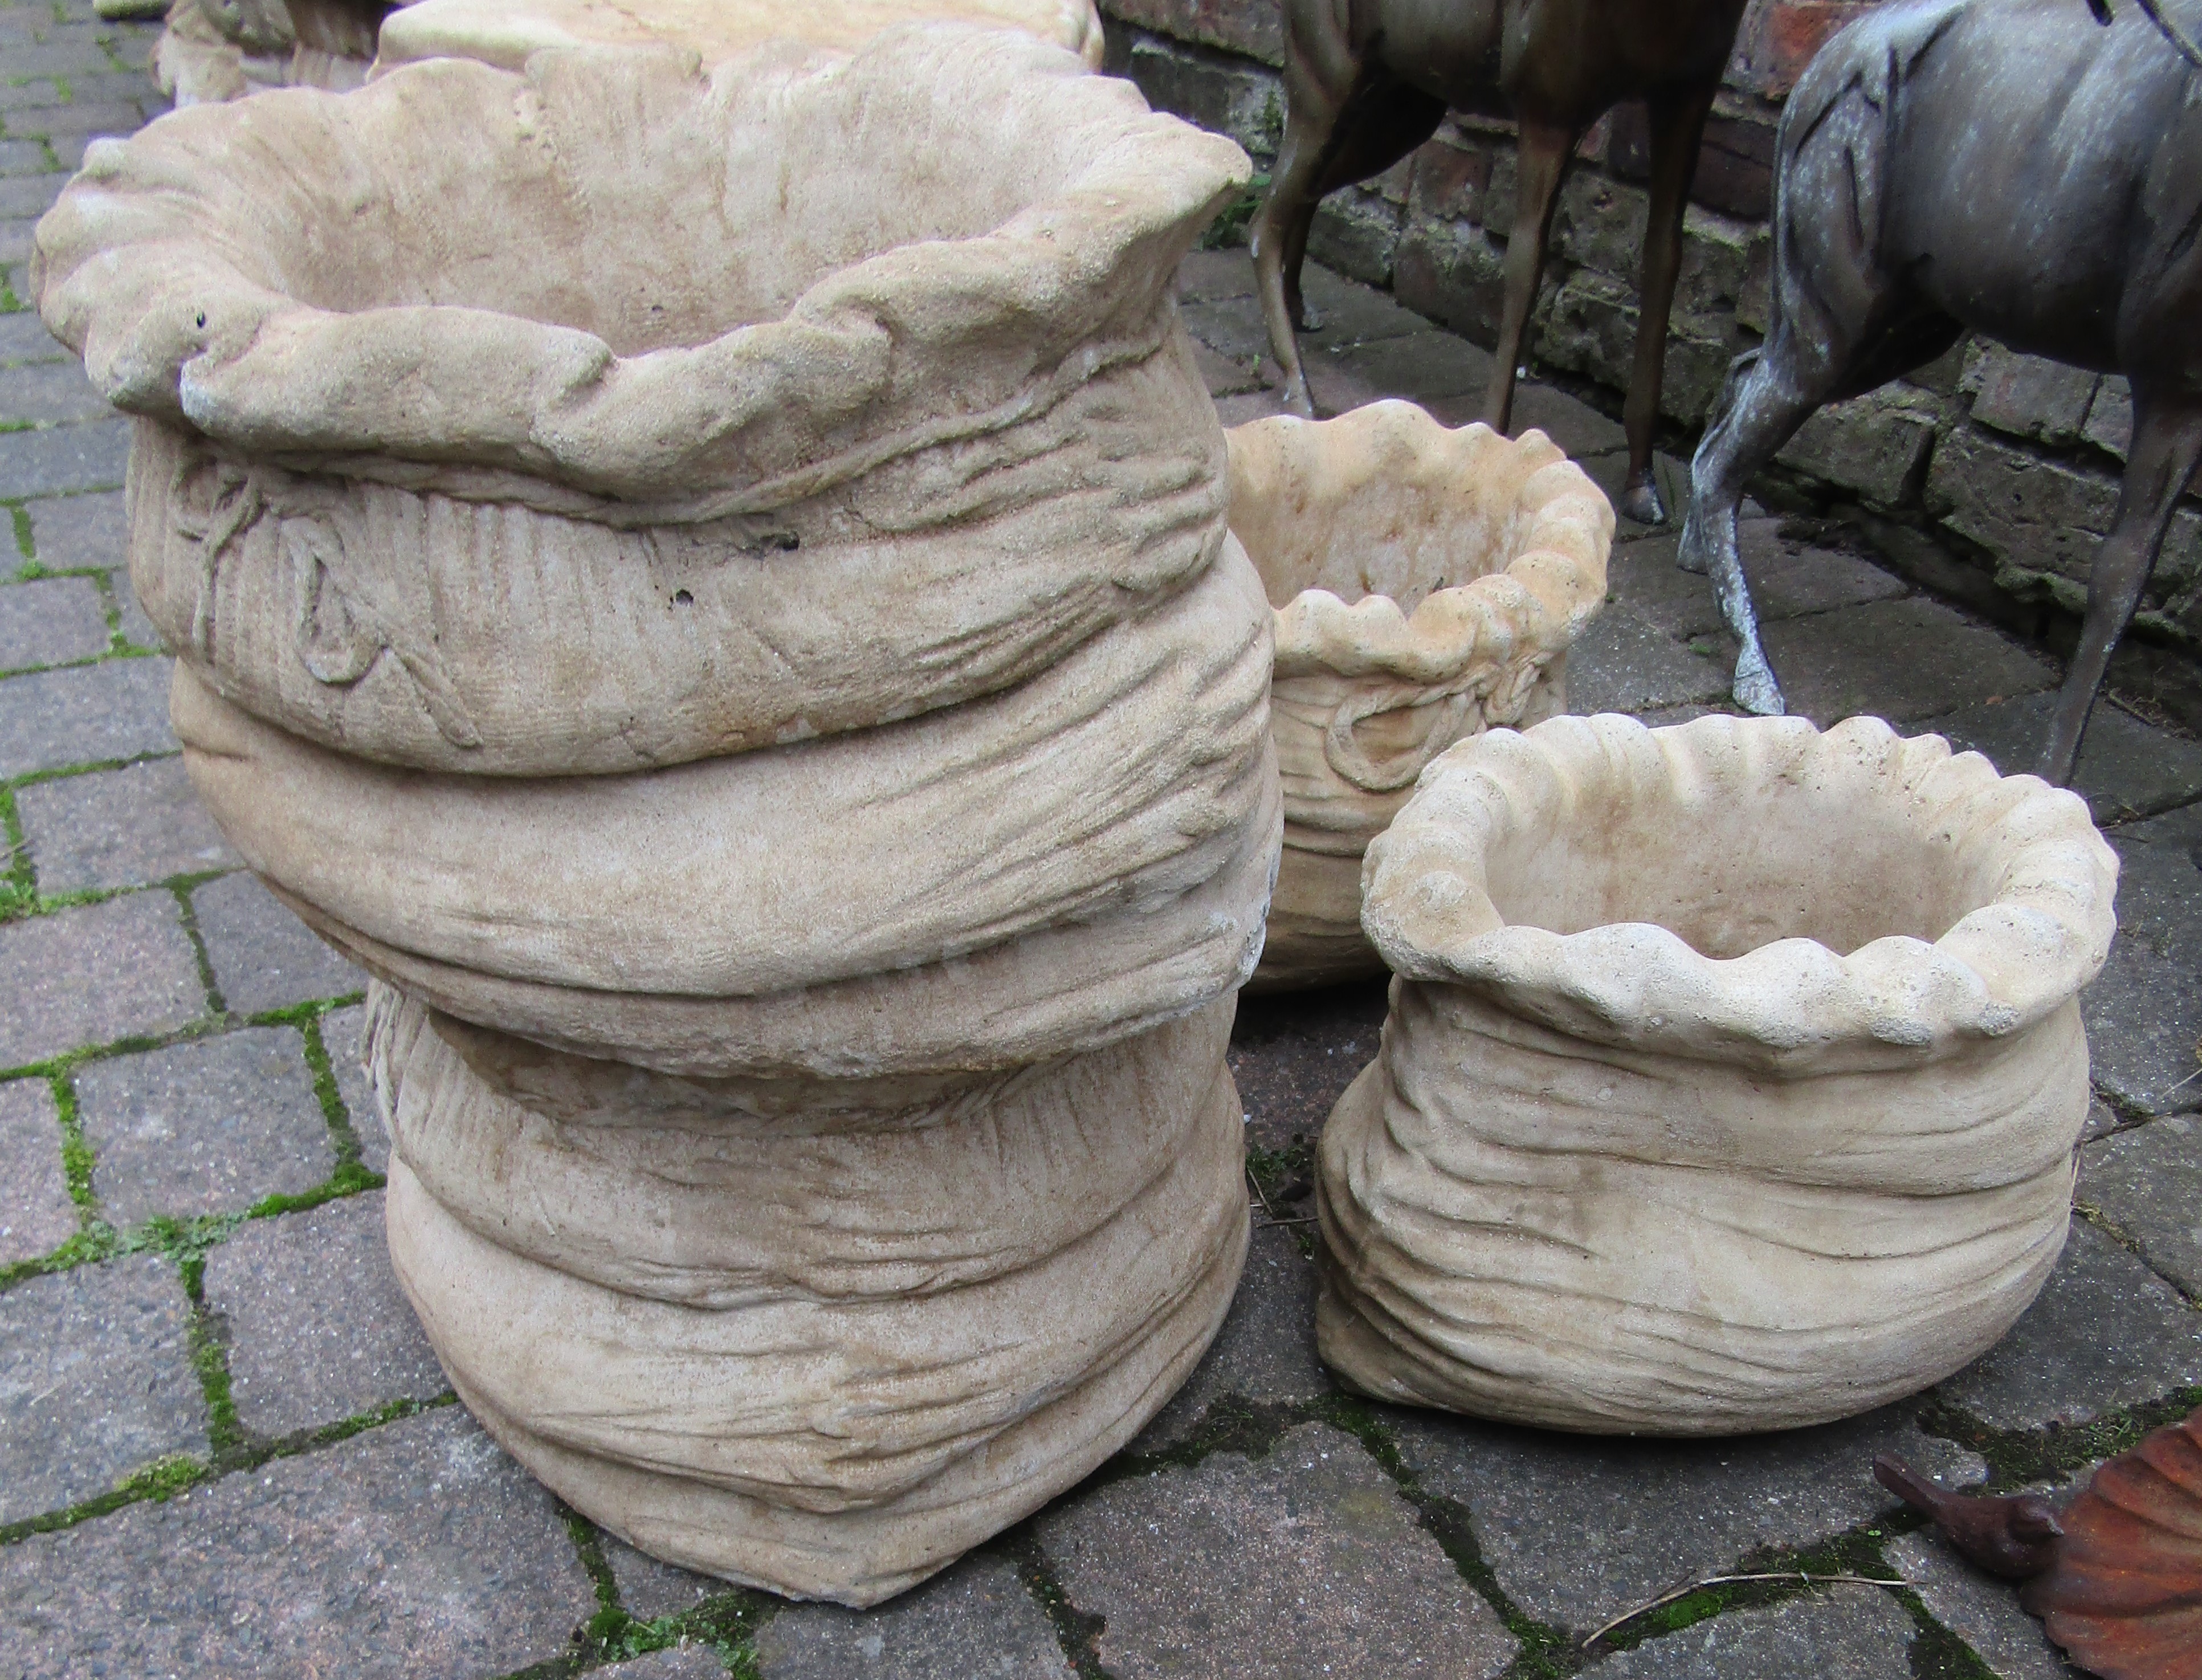 Pair of large and a pair of small sack shaped concrete planters